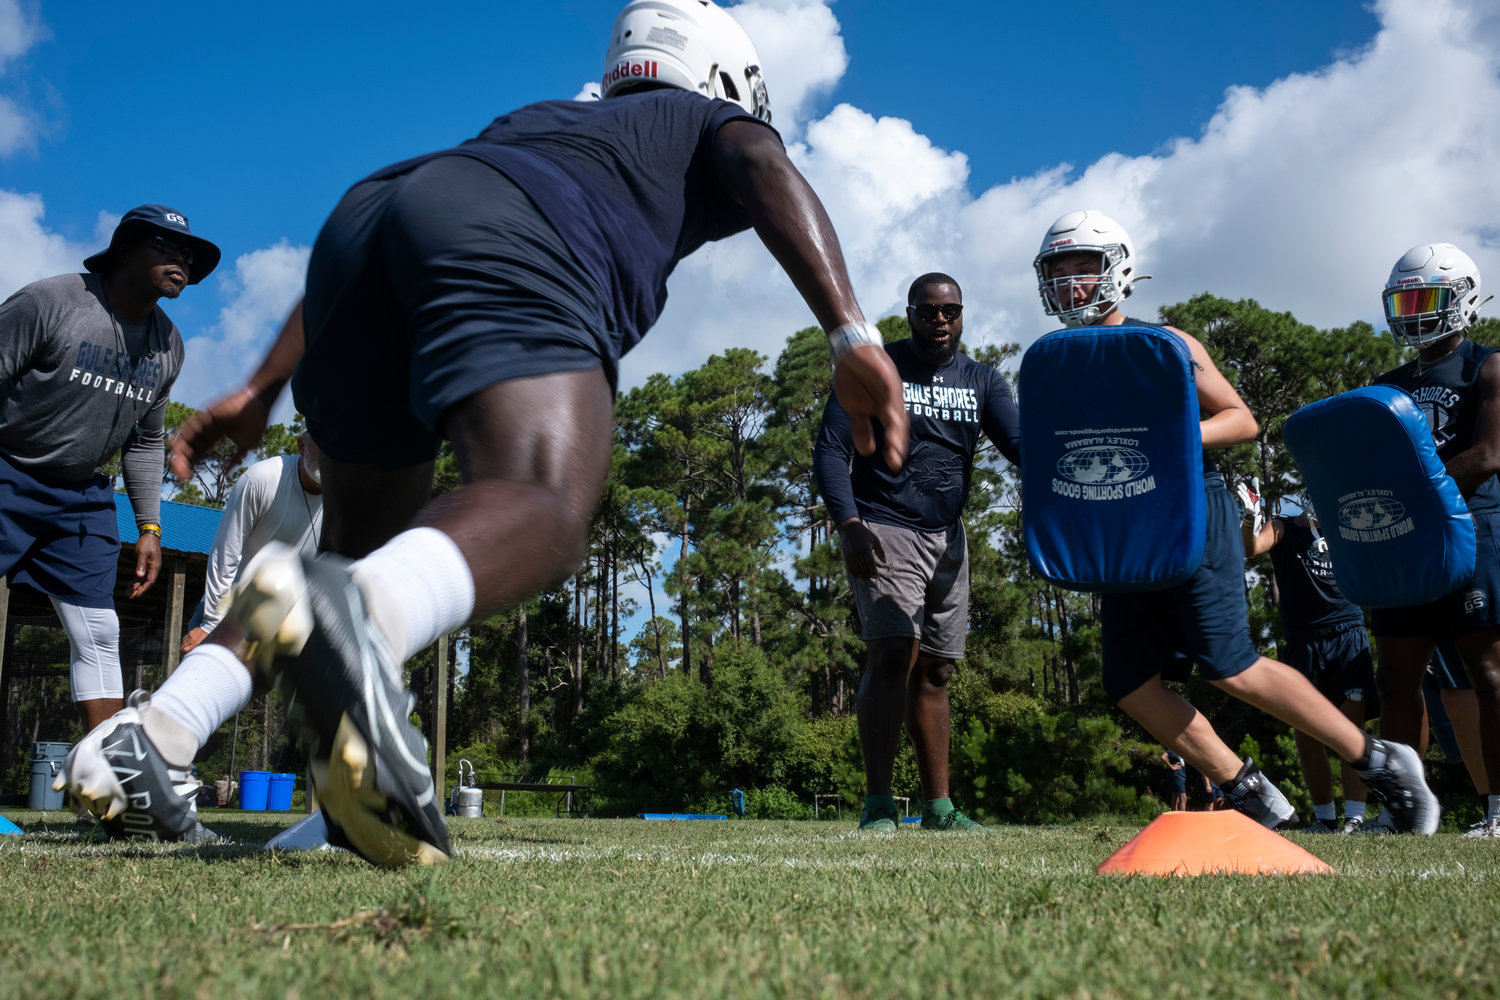 The fall sports season got kicked off Monday morning, Aug. 1, where the Gulf Shores Dolphins were among the teams hitting the field with pads for the first time.